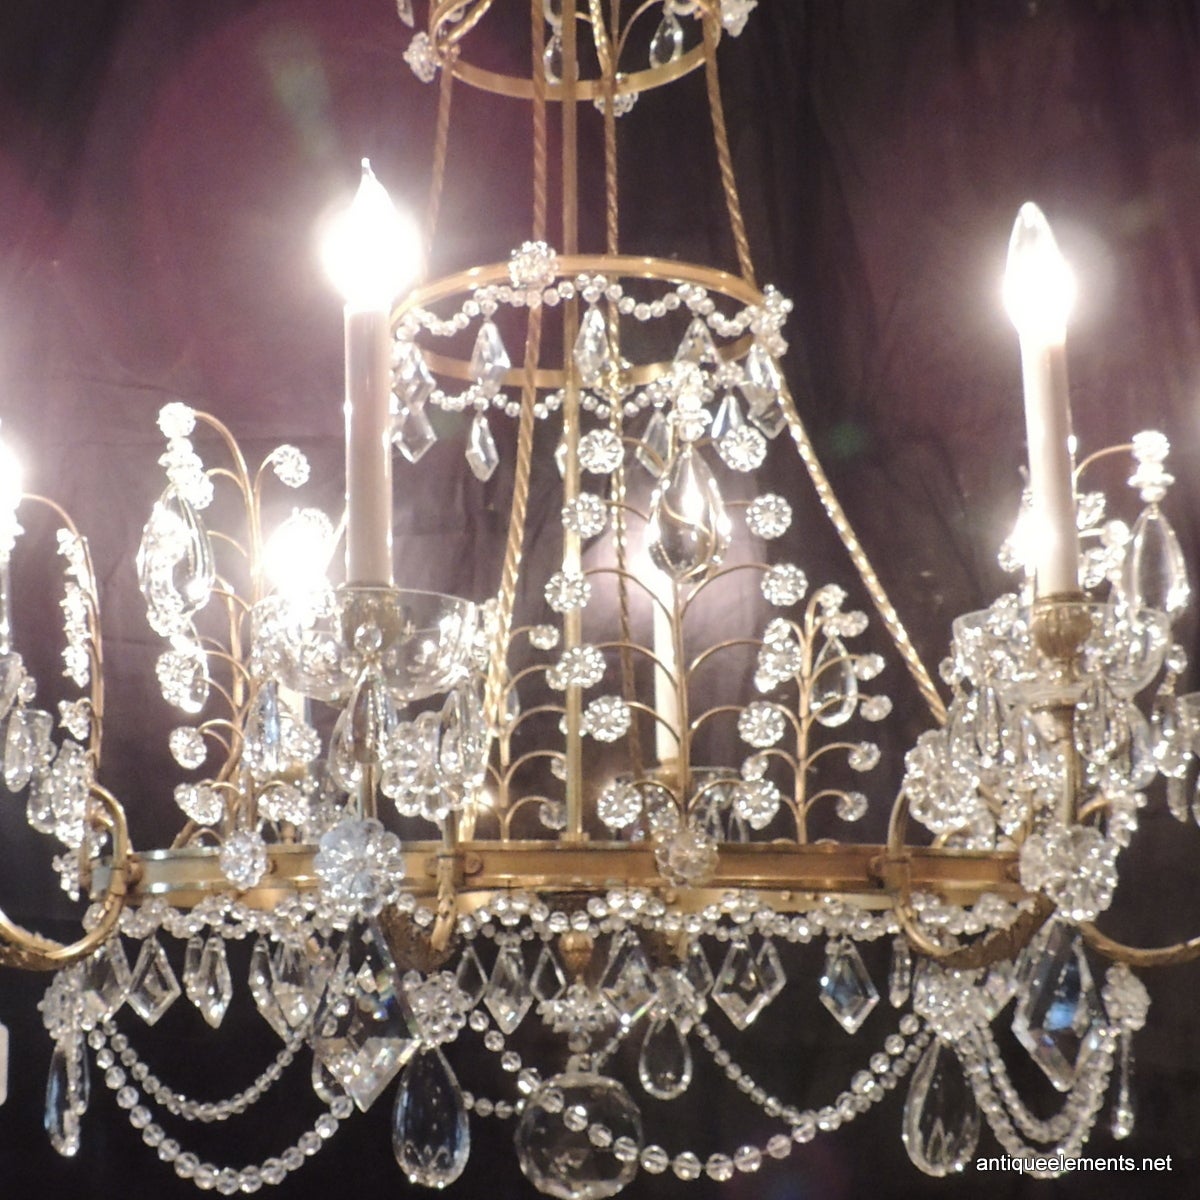 This elegant French Baltic style early 20th century eight-light chandelier will be a wonderful addition to your home or business. An elegant French Bronze and Crystal chandelier that is detailed starting with the crown of crystal drops, the